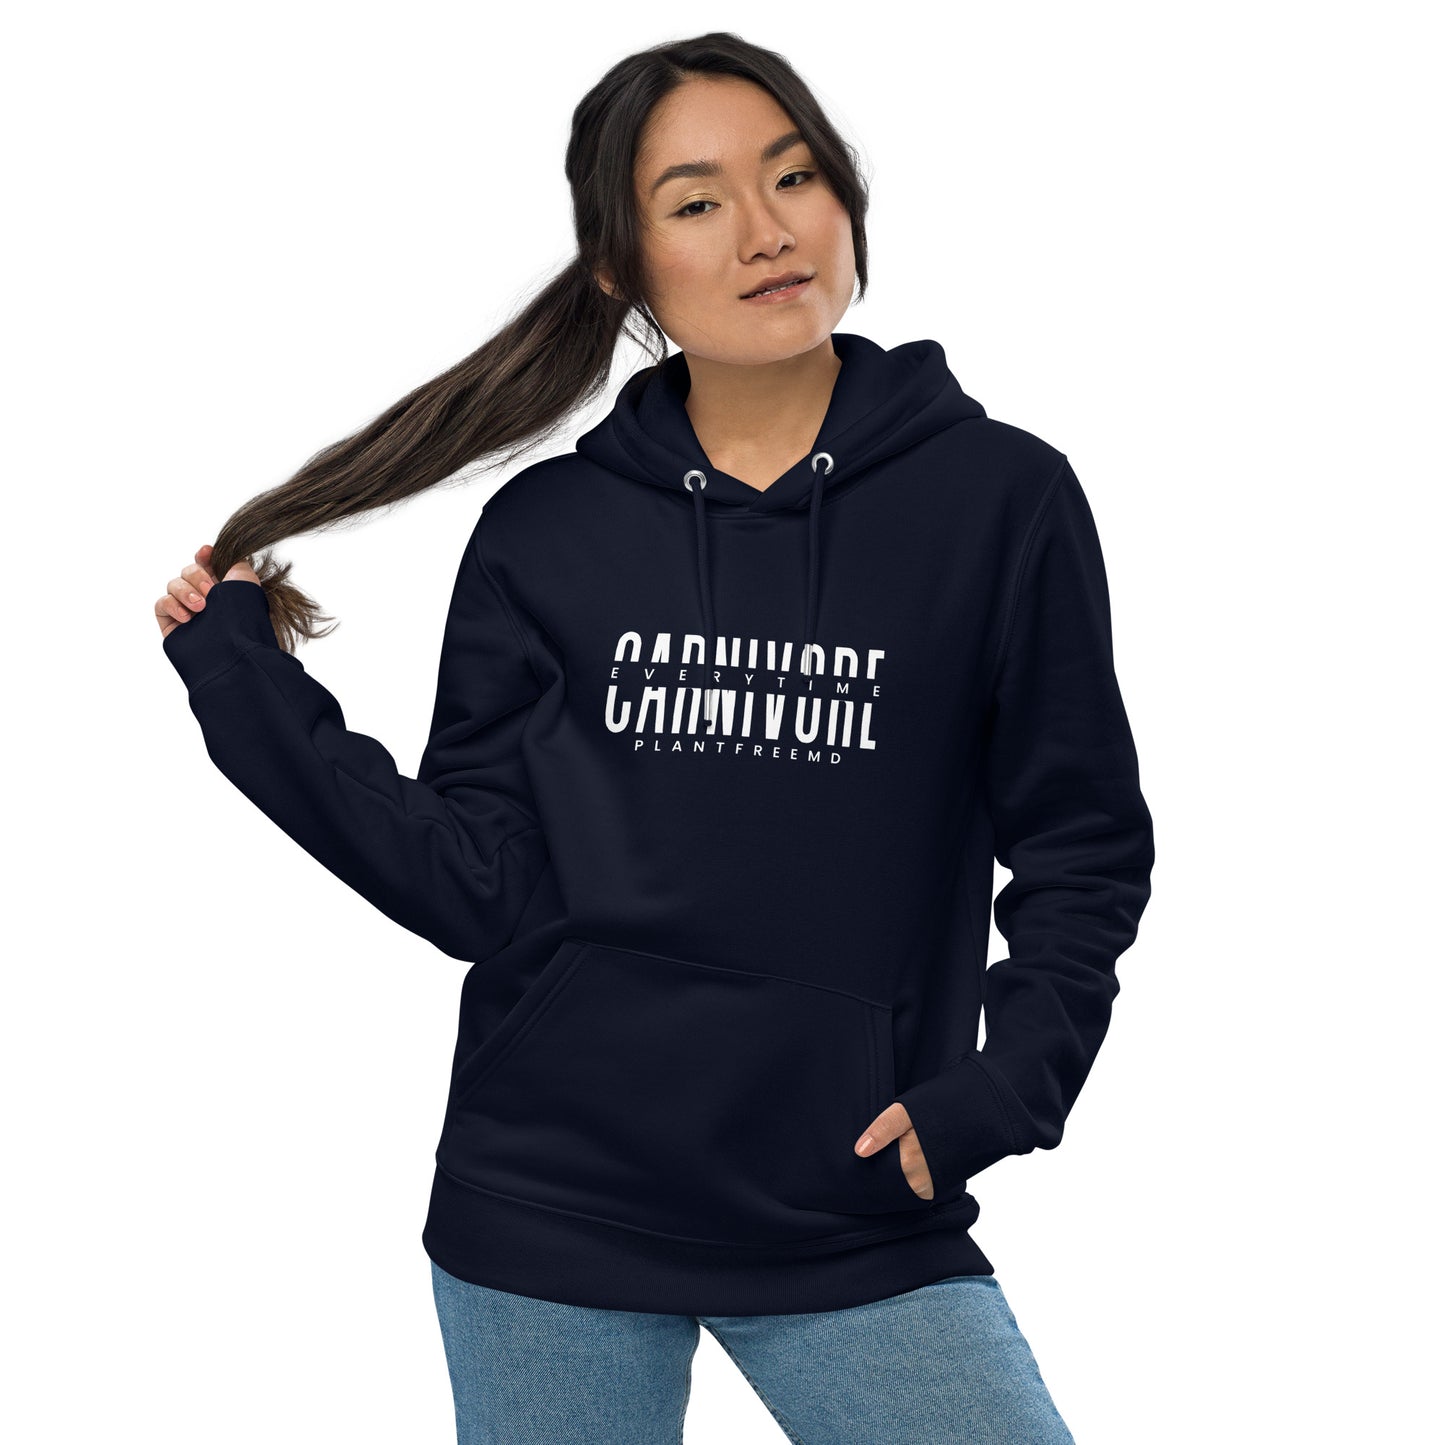 Carnivore Every Time Unisex essential eco hoodie